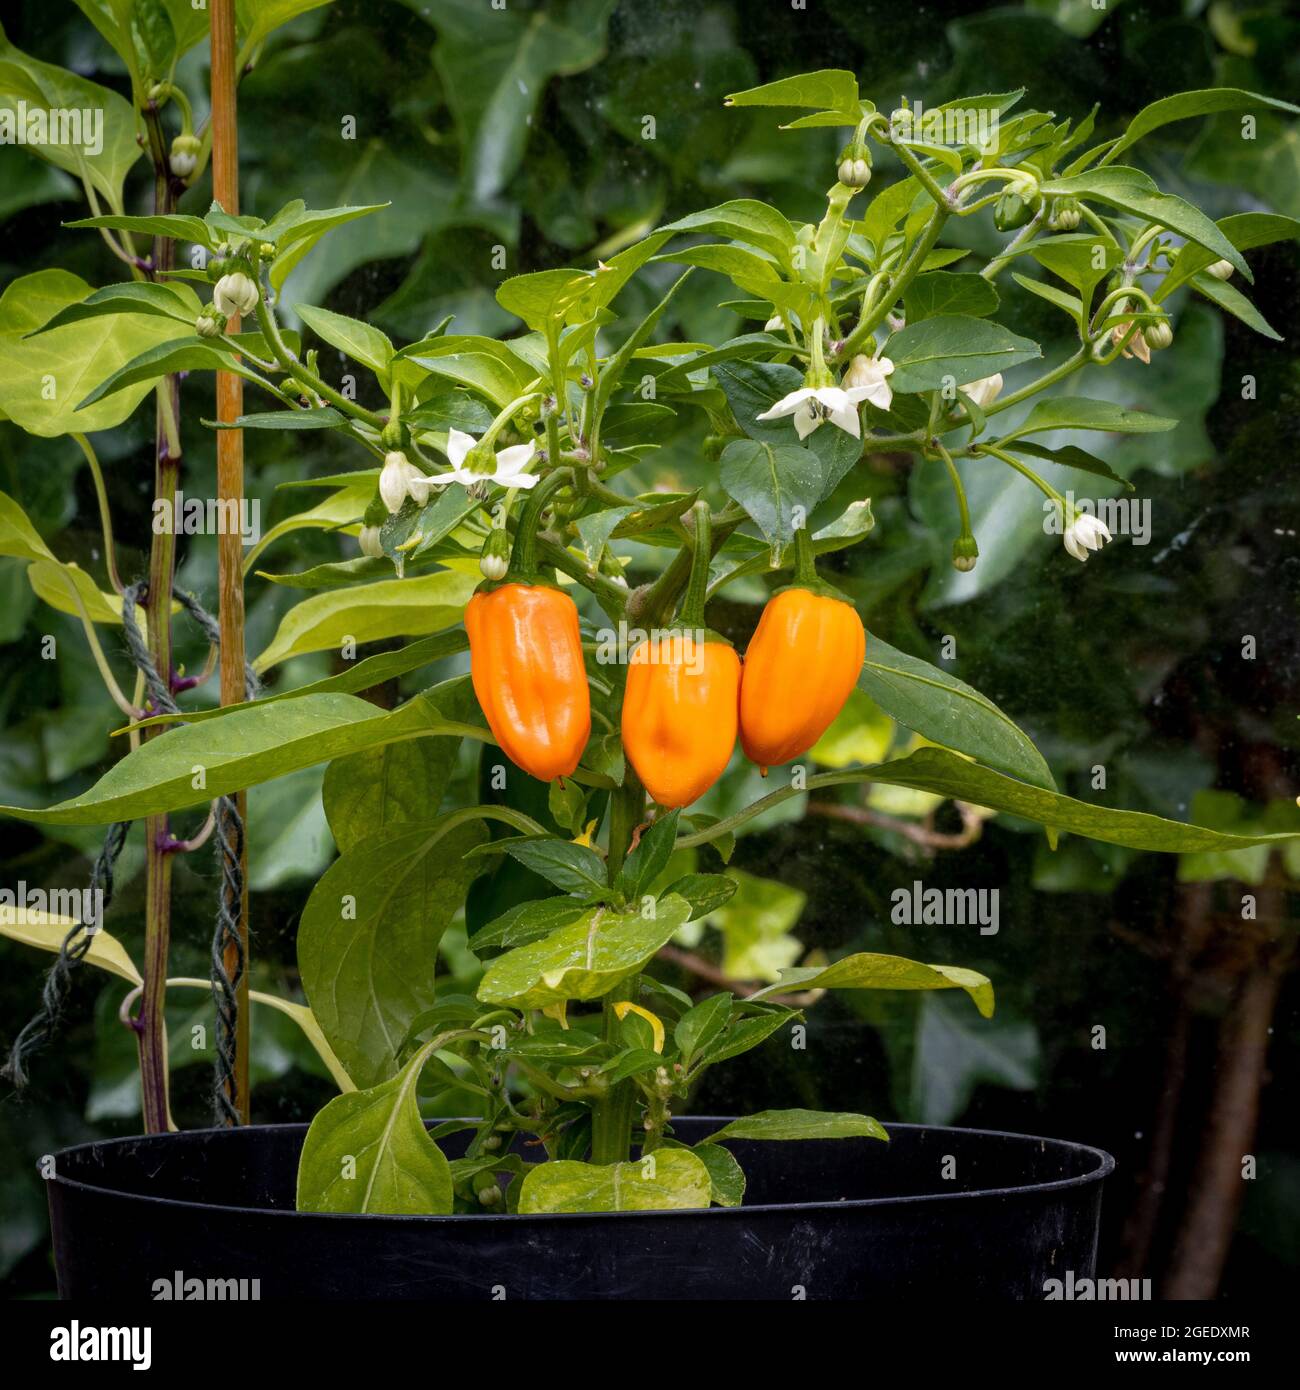 The orange fruits of Capsicum Orange Spice. A hot chilli pepper with green fruits that turn to orange when ripe. Stock Photo